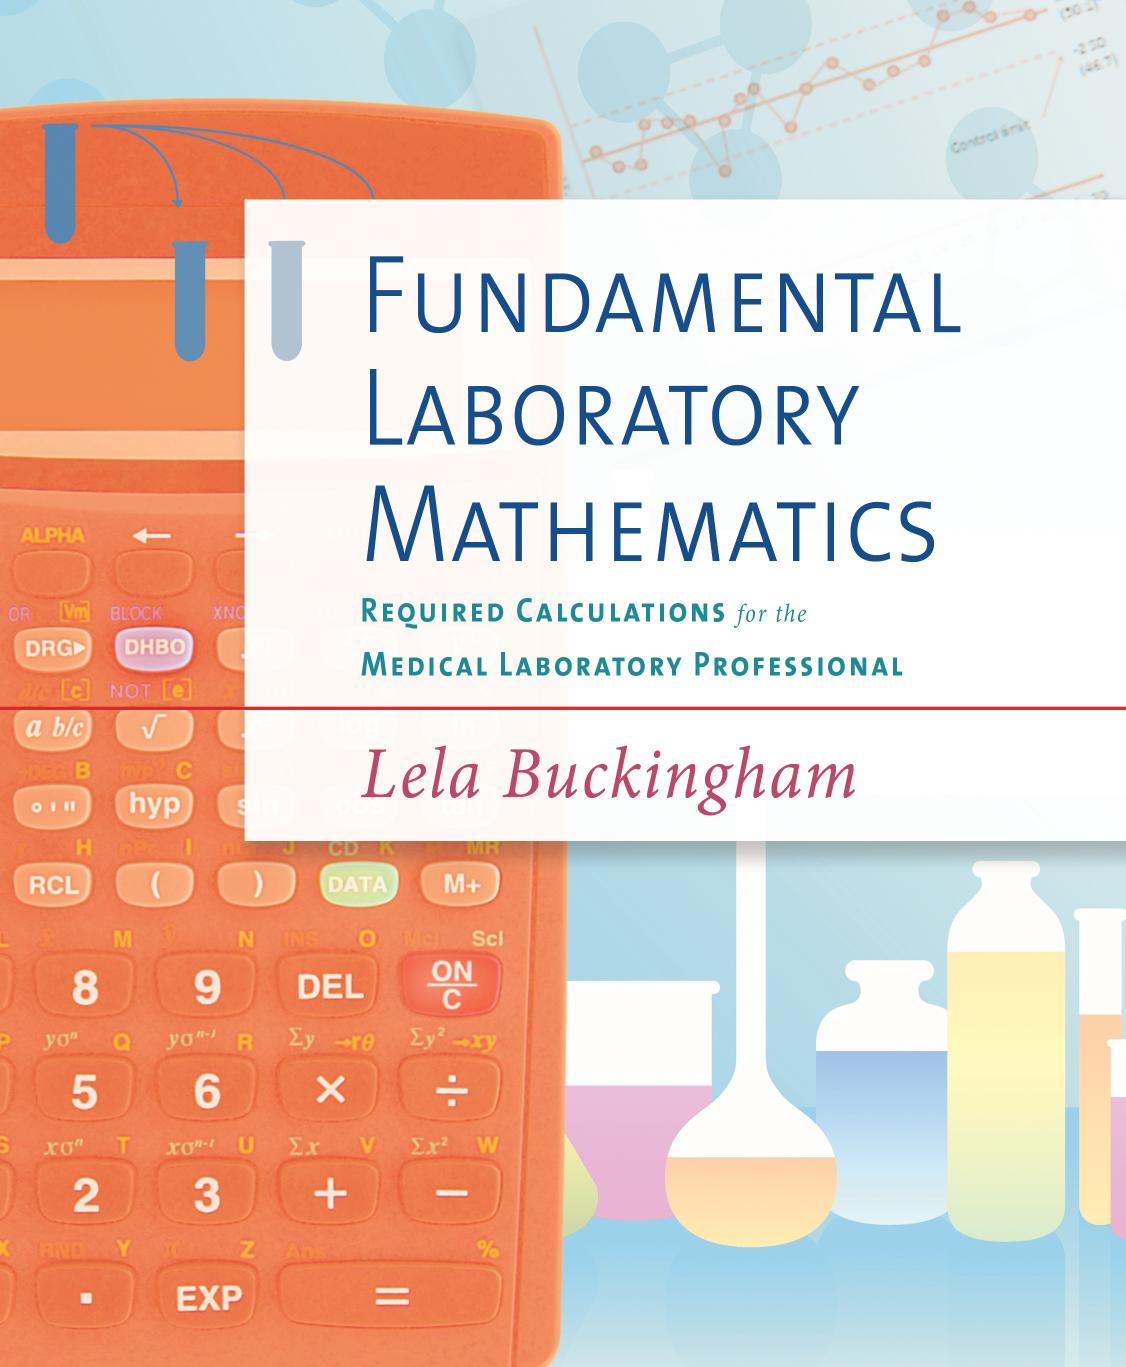 Fundamental laboratory mathematics  required calculations for the medical laboratory professional 2014.pdf